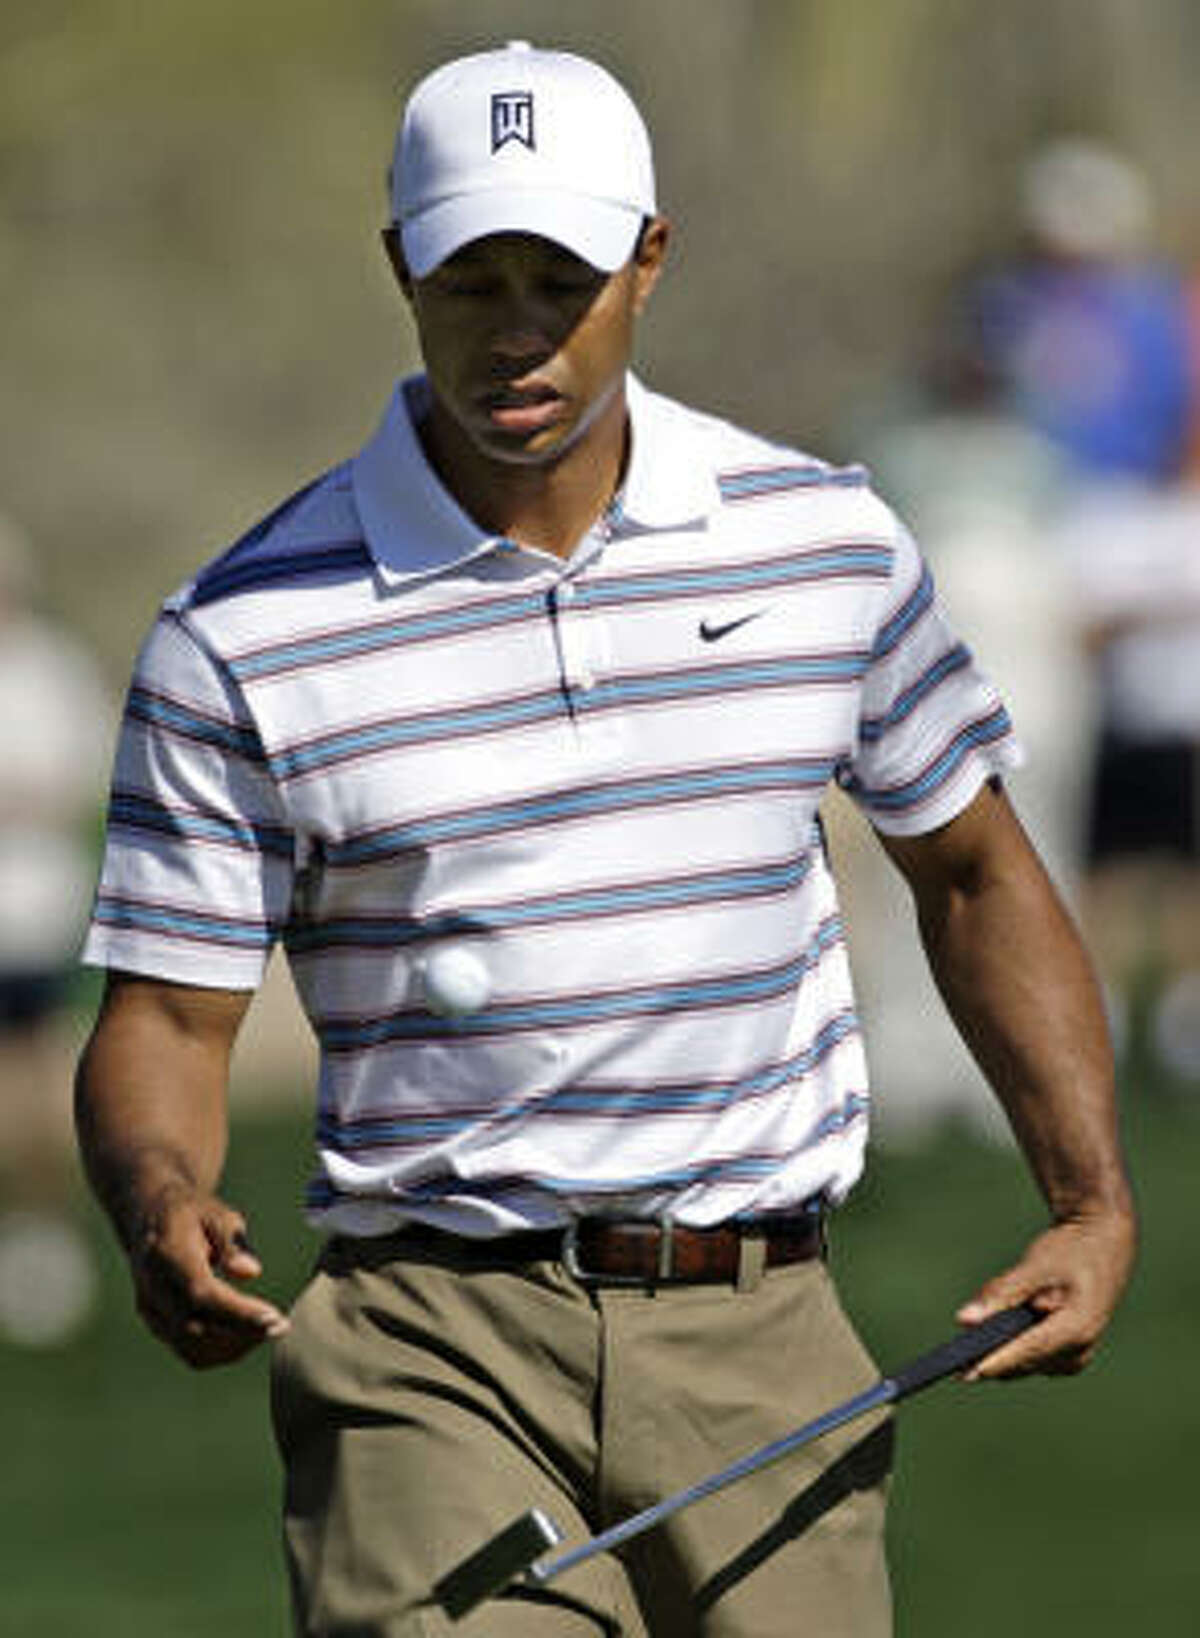 Tiger woods flips his ball to himself as he walks off the green after losing the 13th hole during his 4 and 2 loss to Tim Clark in the second round of the Accenture Match Play Championship on Thursday.